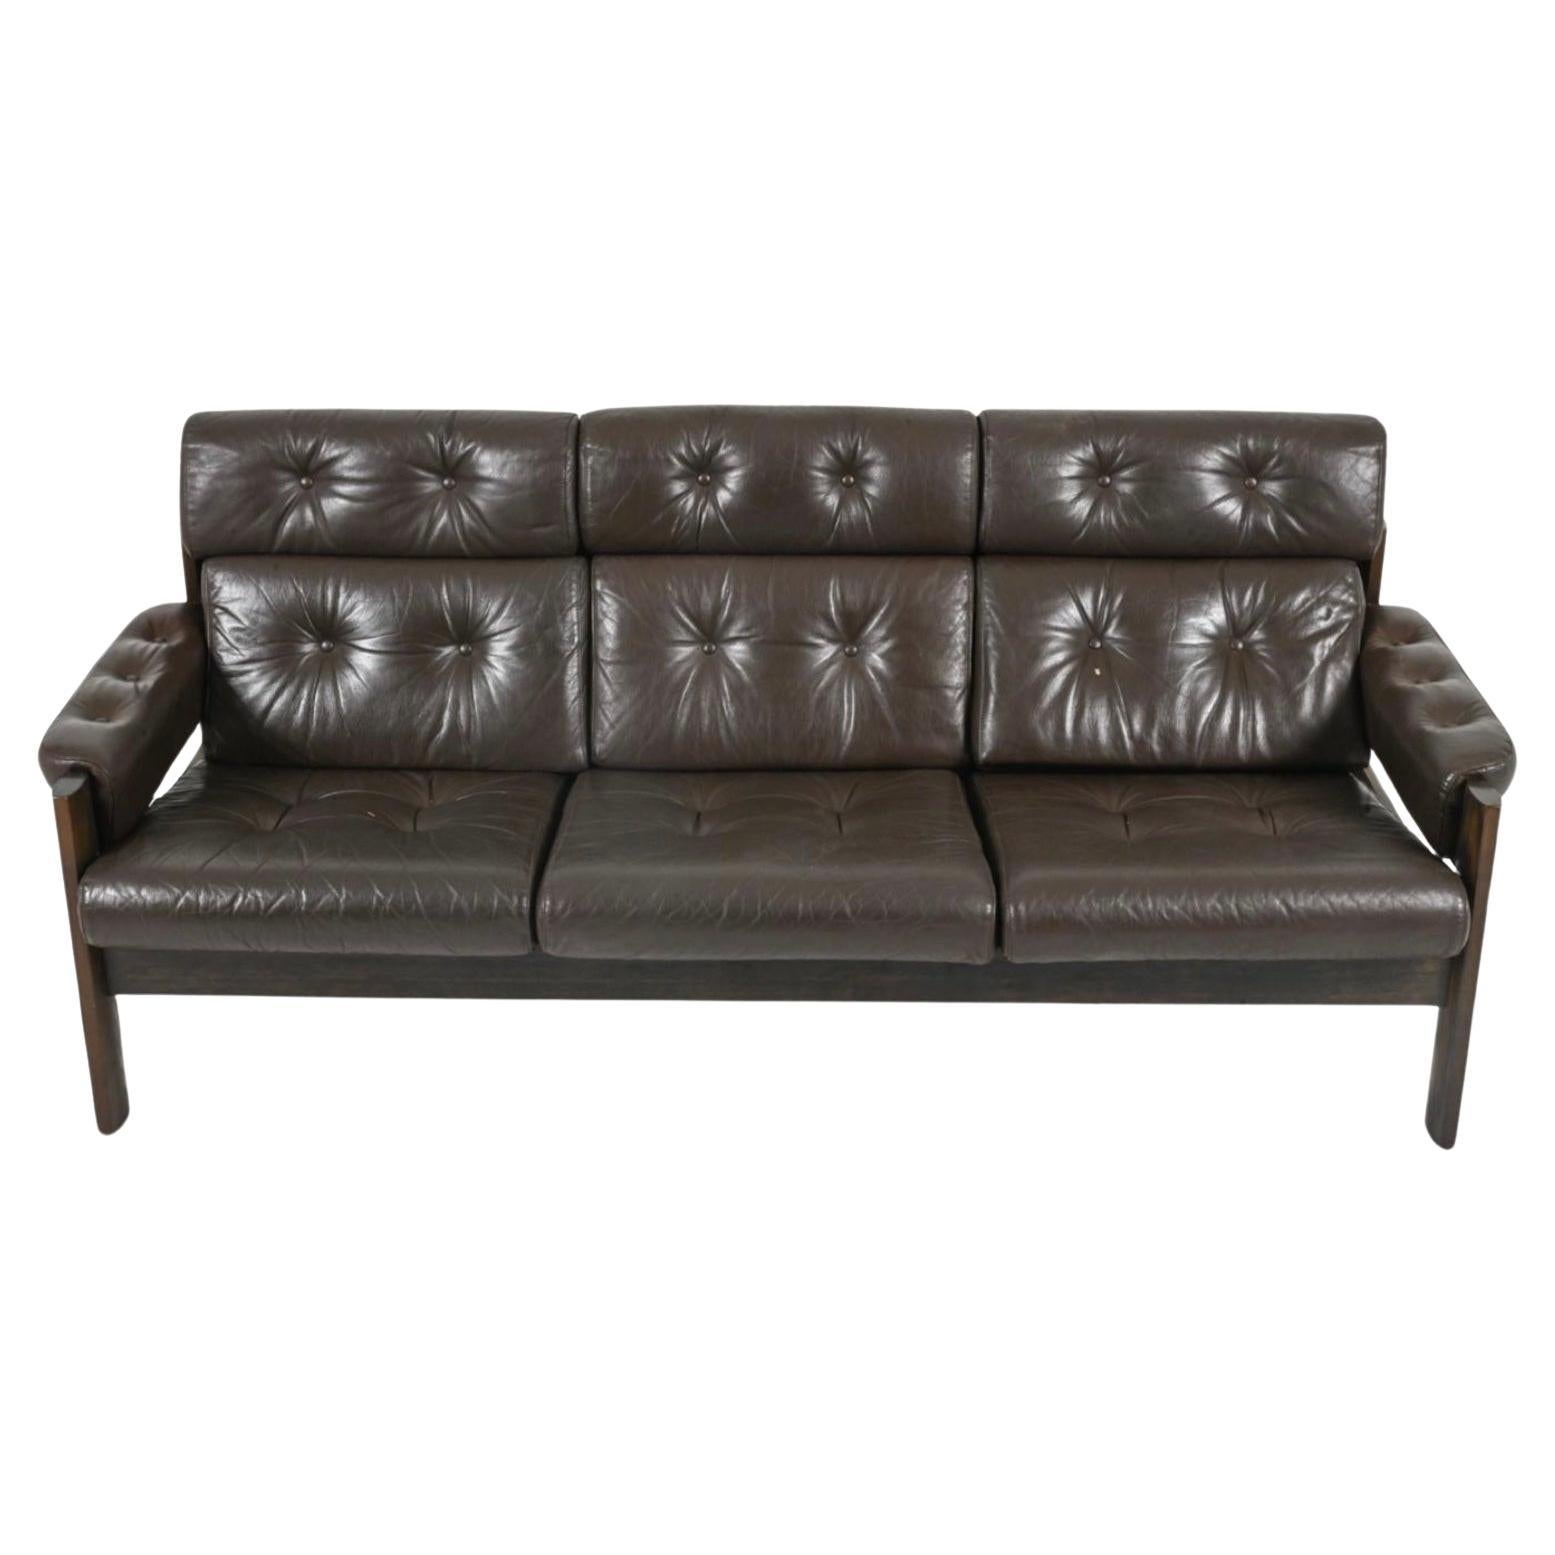 Mid-century Norwegian Modern Ekornes Brown leather oak 3 seater sofa. Superb tufted dark brown leather with solid oak wood frame. Beautiful condition and very comfortable. Great Norwegian design. Good vintage condition shows normal wear - very